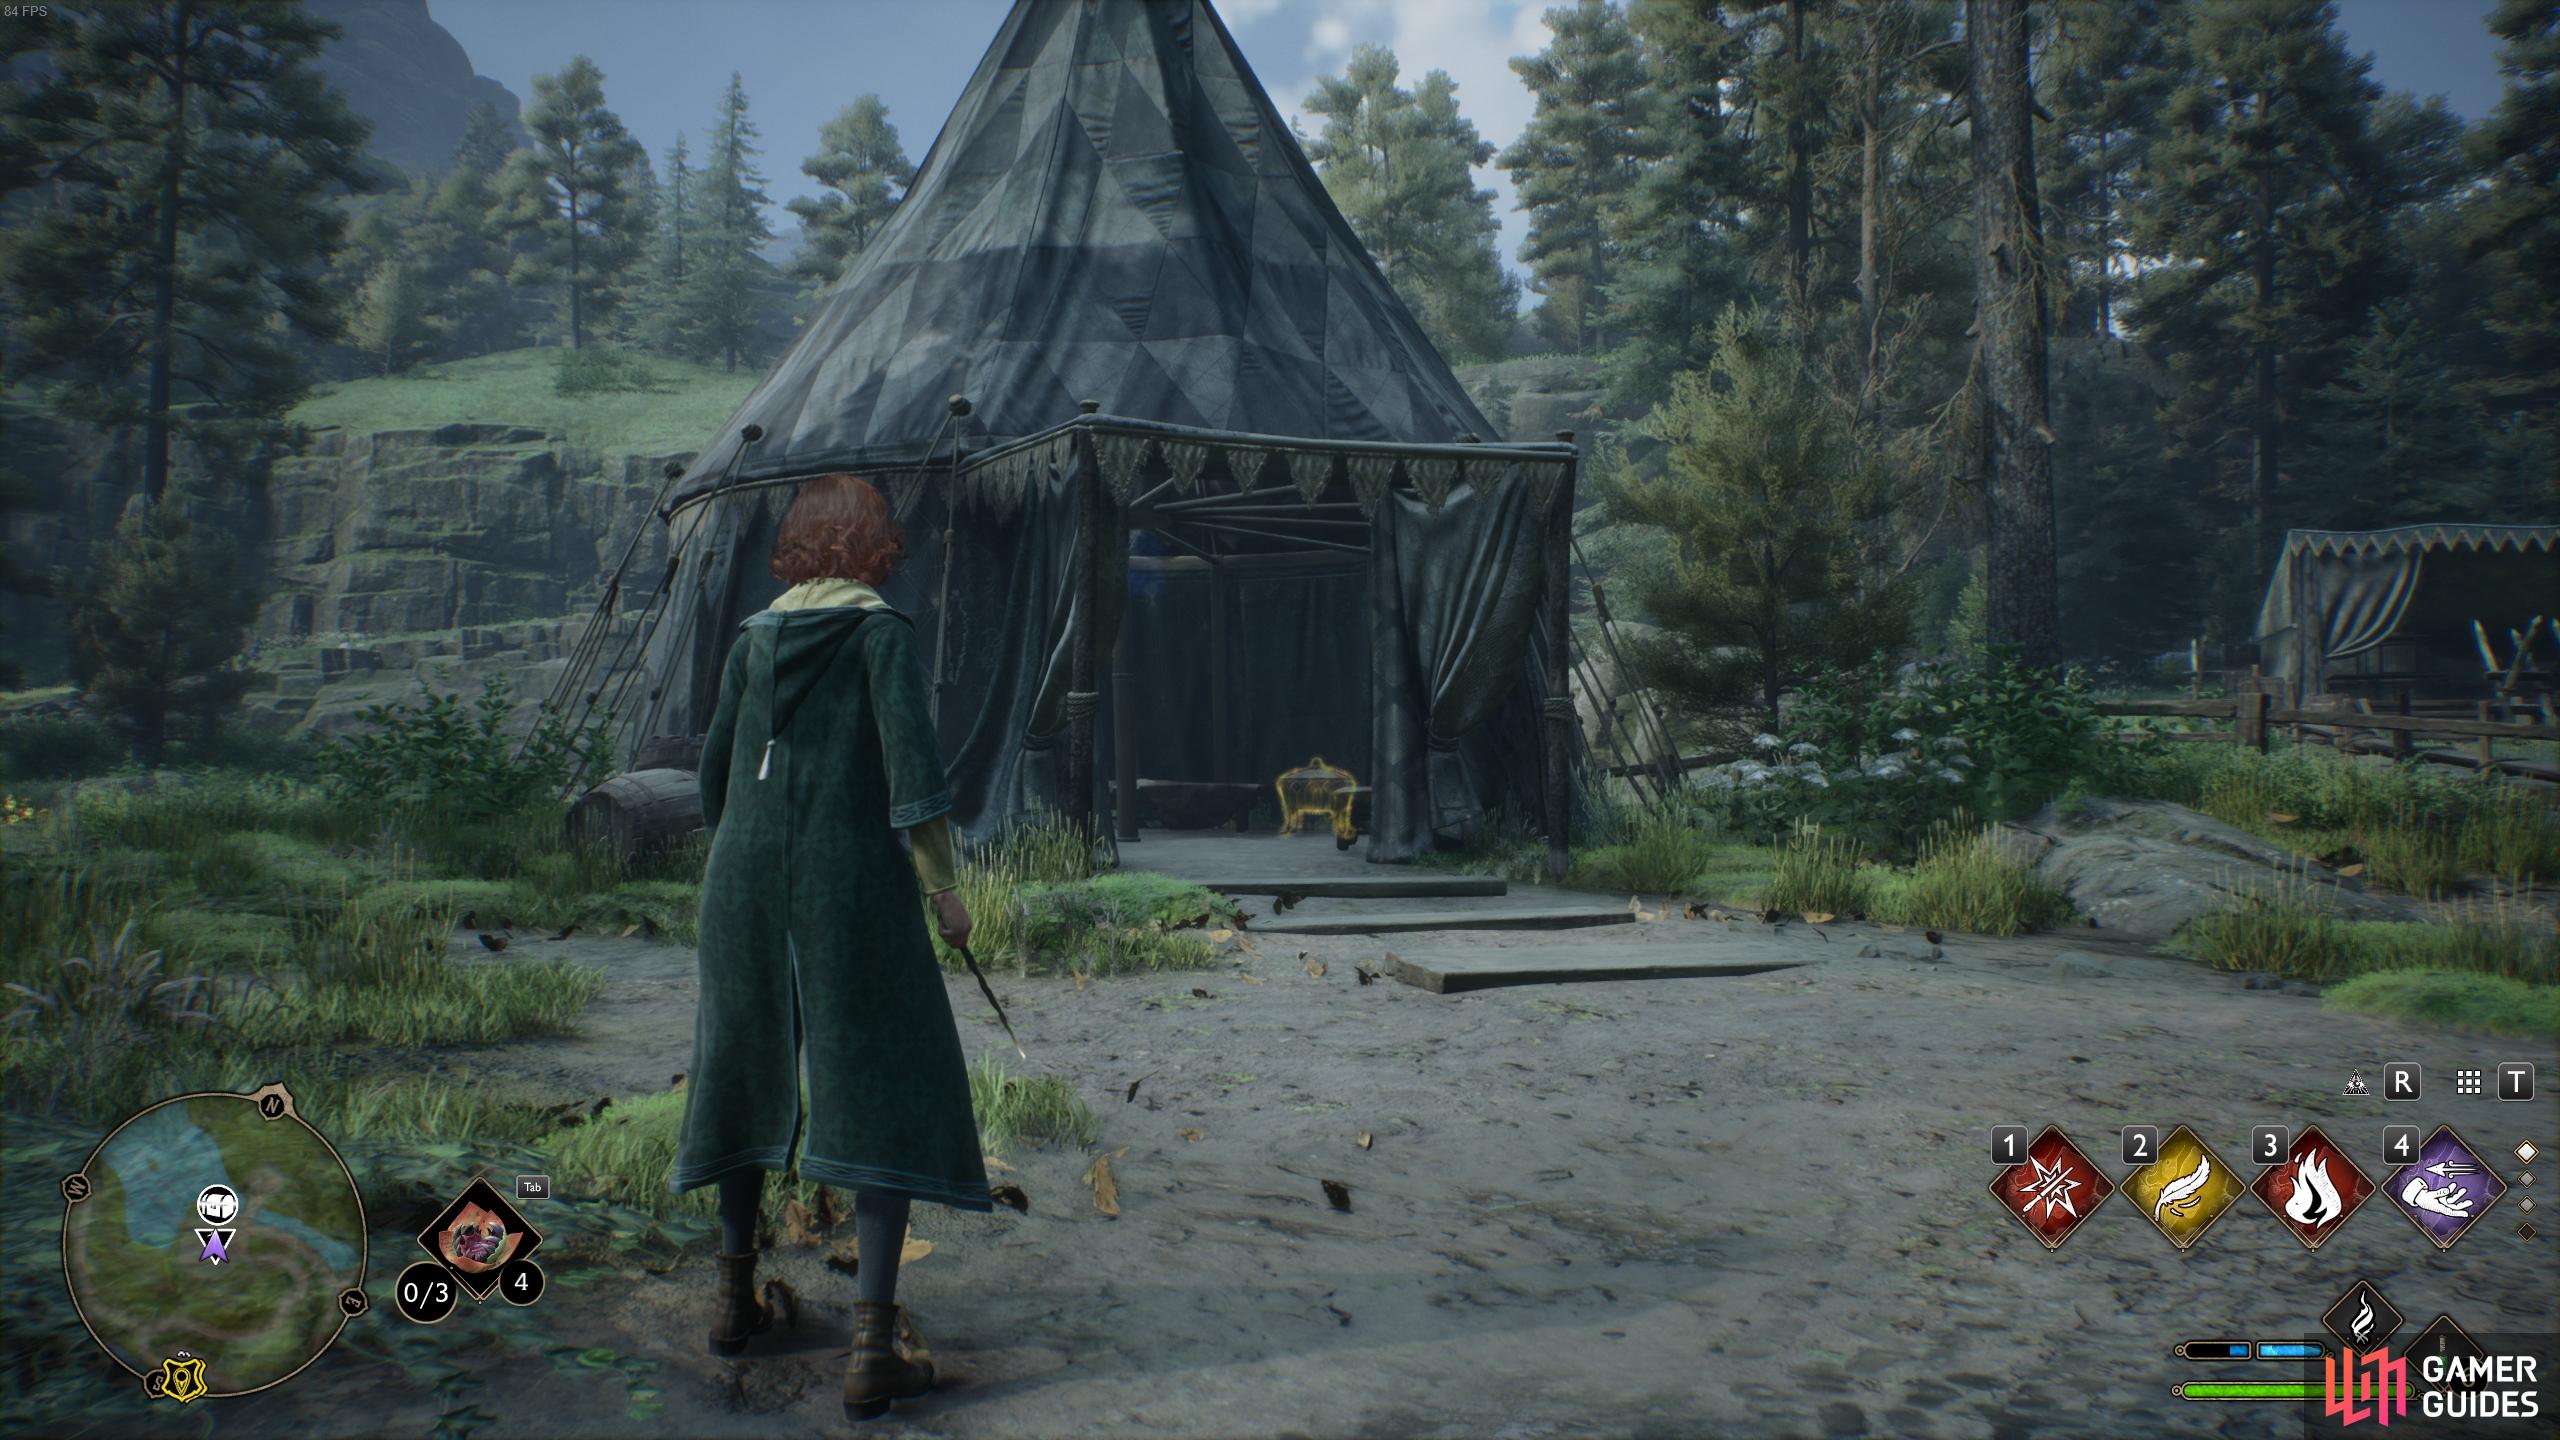 You'll find the Collection Chest inside this tent, in the northern part of the camp.